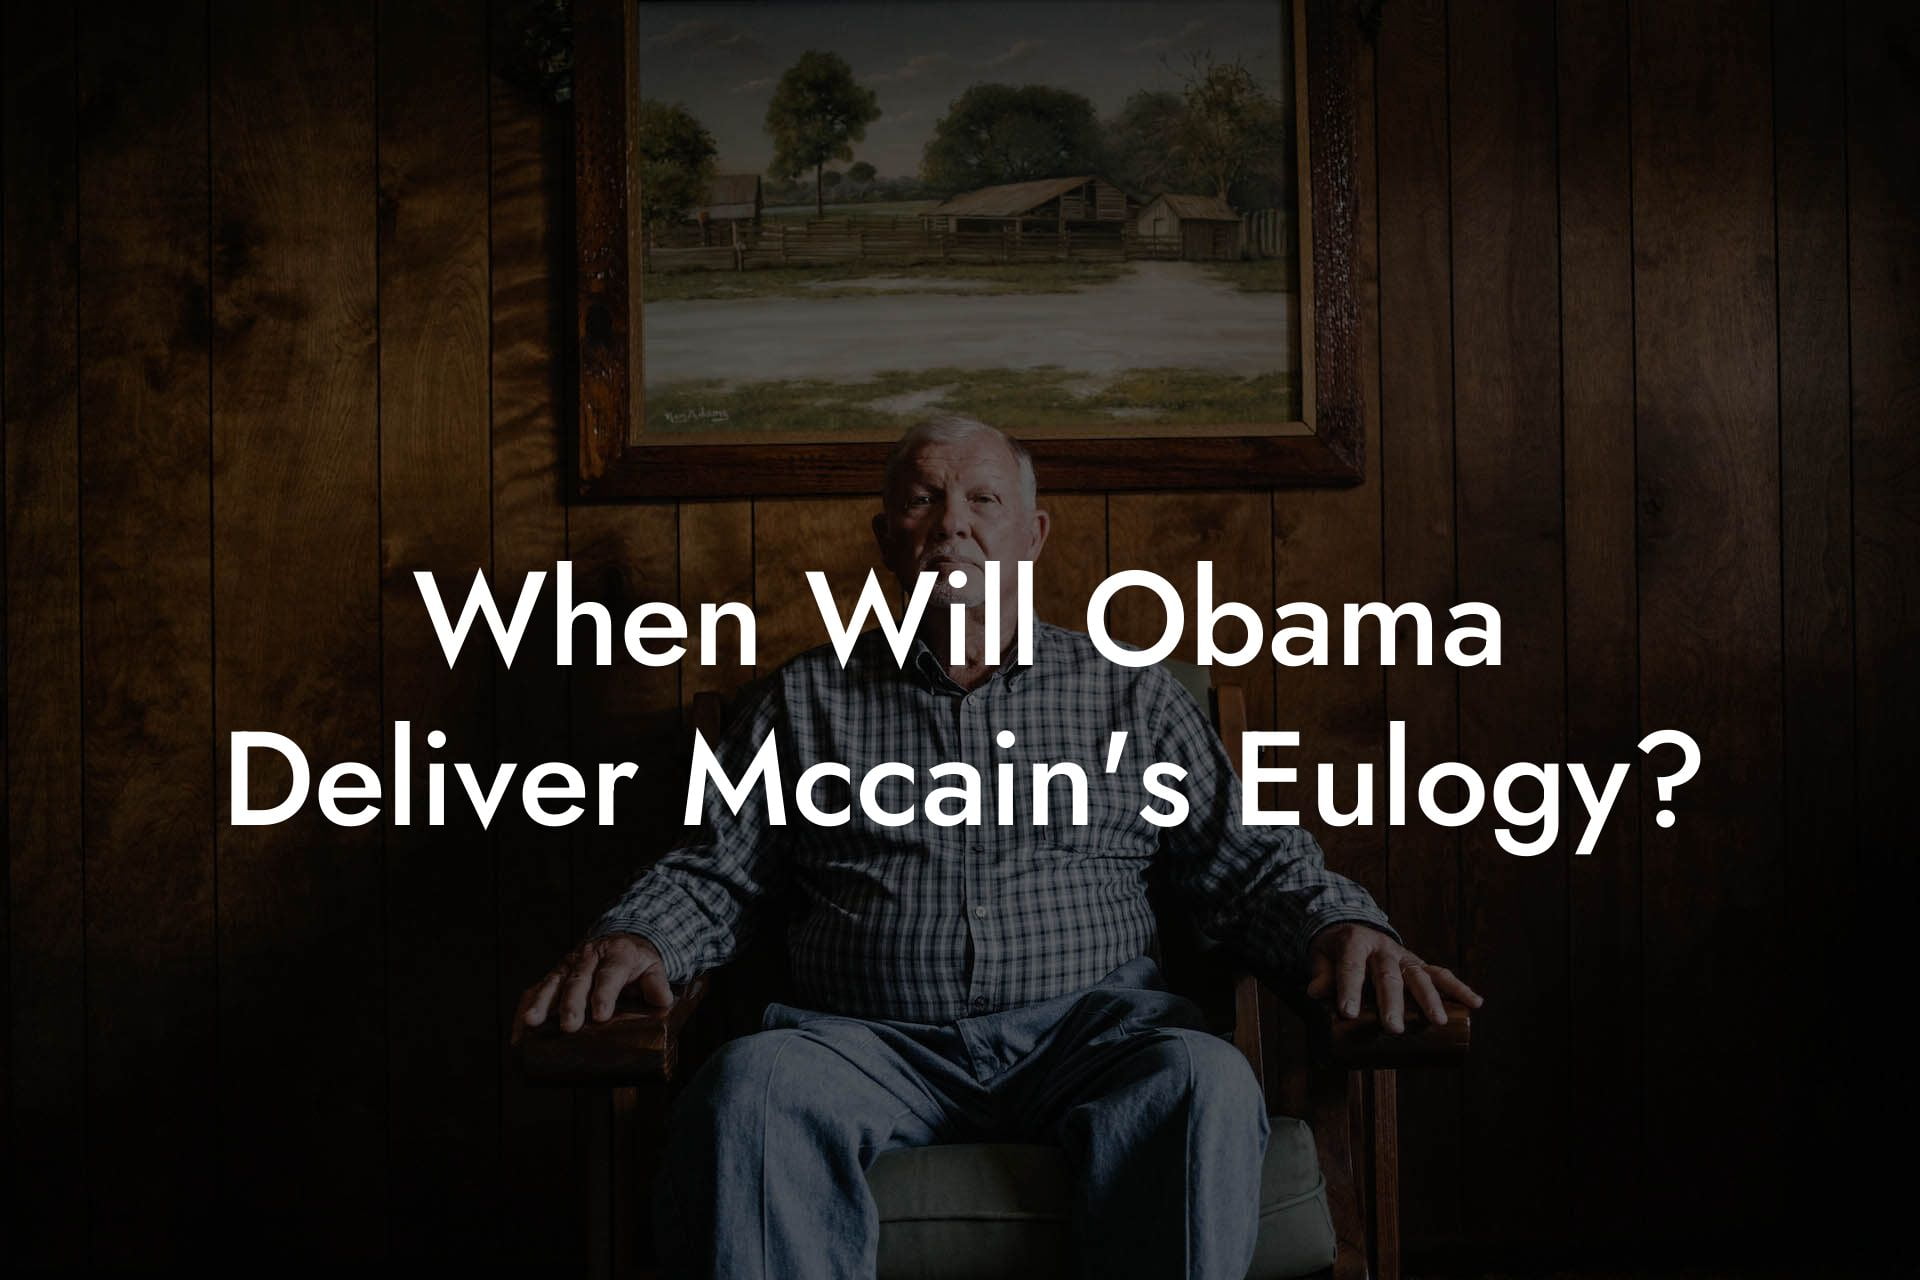 When Will Obama Deliver Mccain's Eulogy?